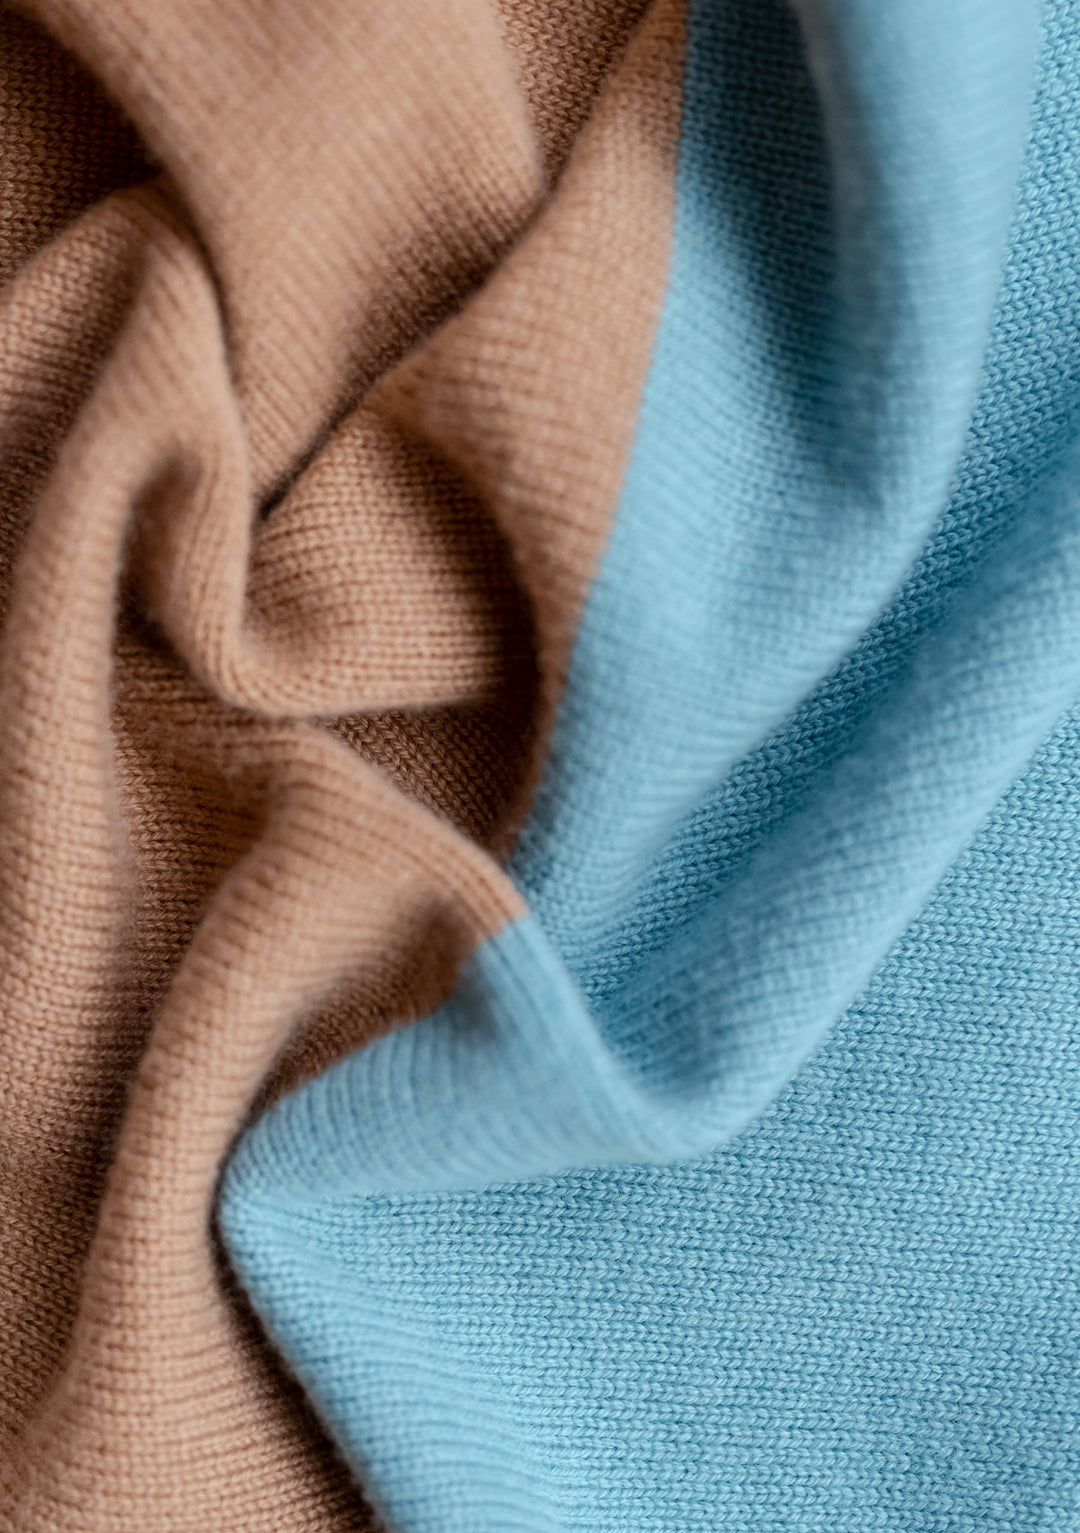 Merino Triangle Scarf in Camel and Blue